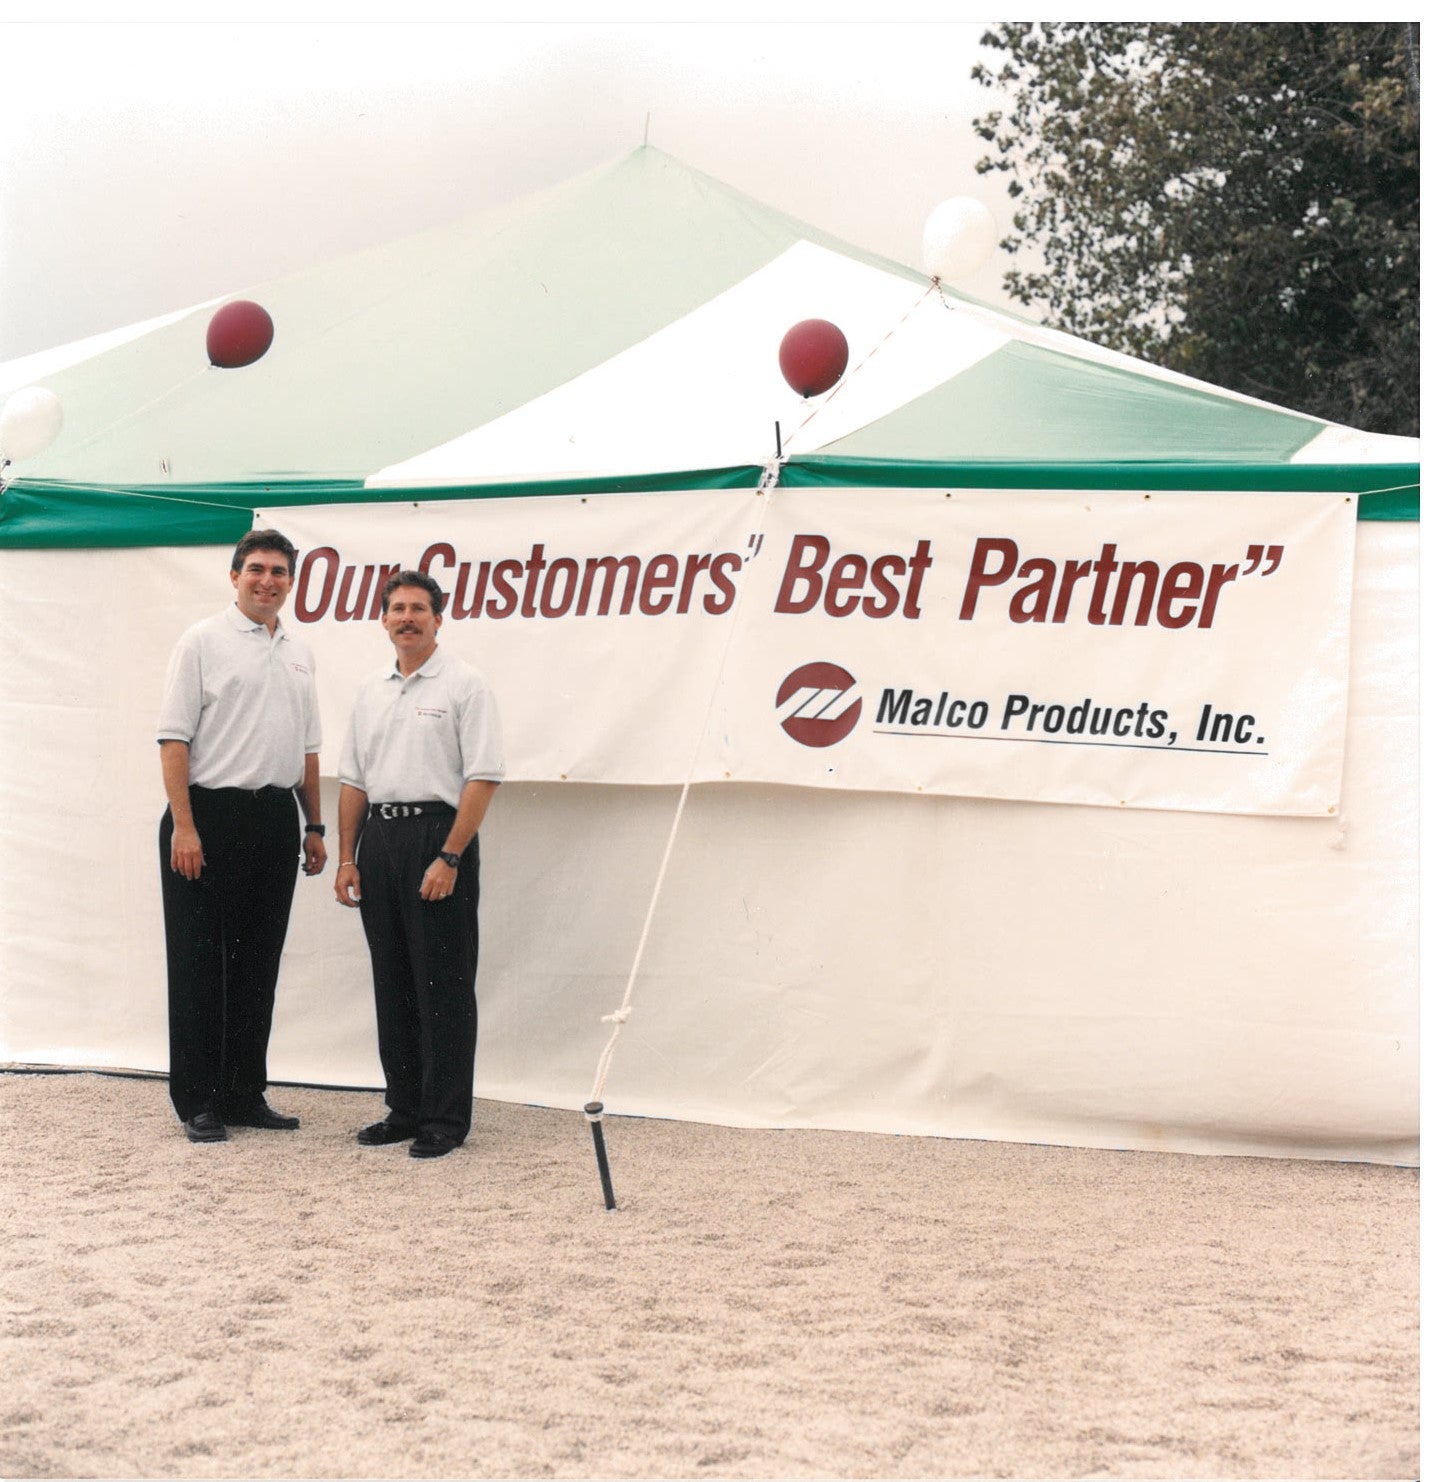 Two men are standing in front of a tent with the text on the image saying: "Our customers' Best Partner" - Malco Products, Inc.